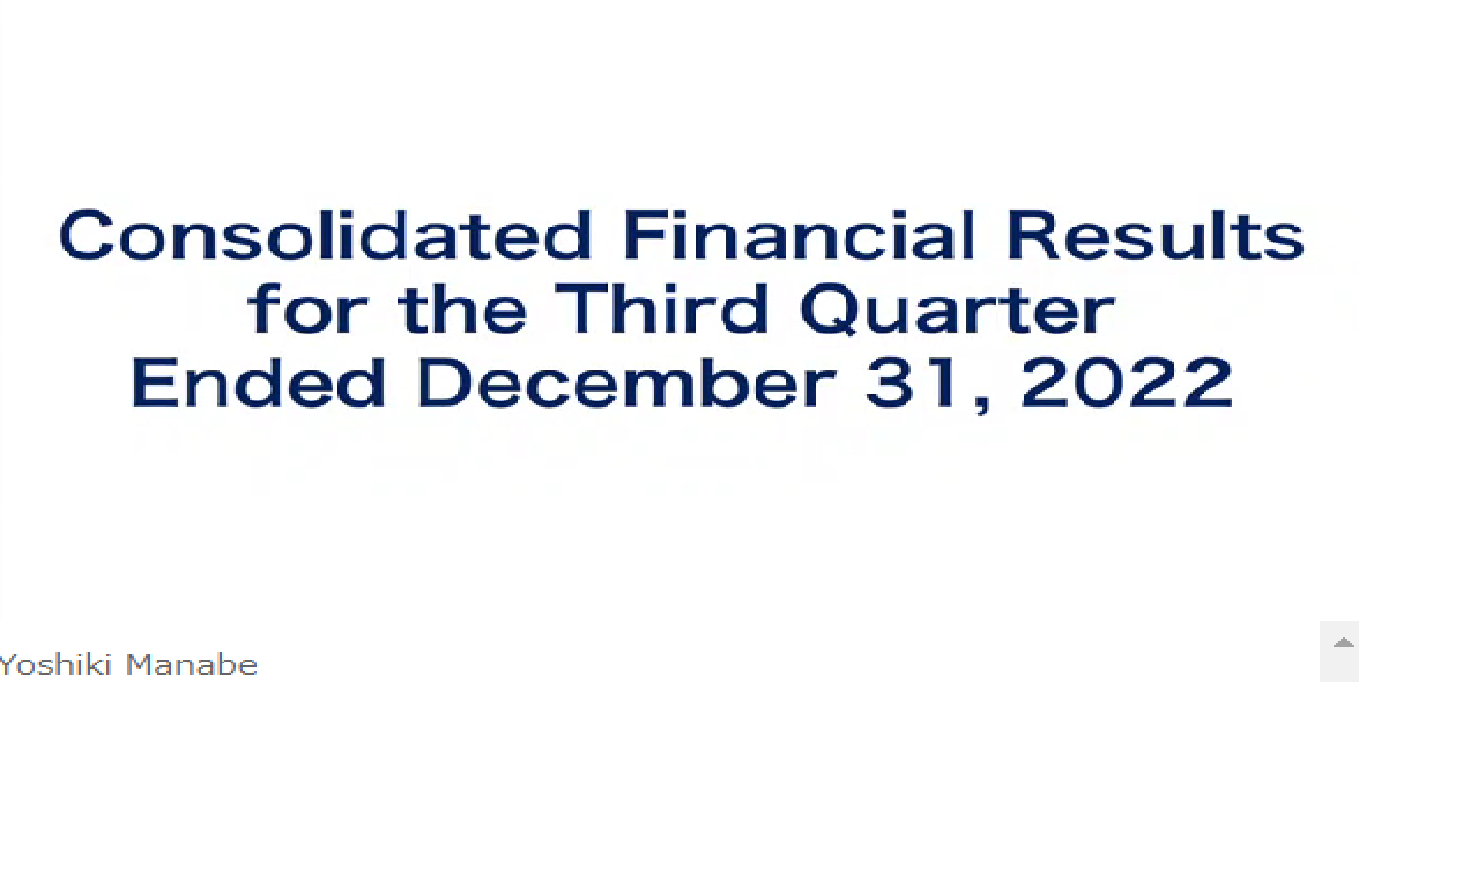 Consolidated Financial Results for the Third Quarter Ended December 31,2022